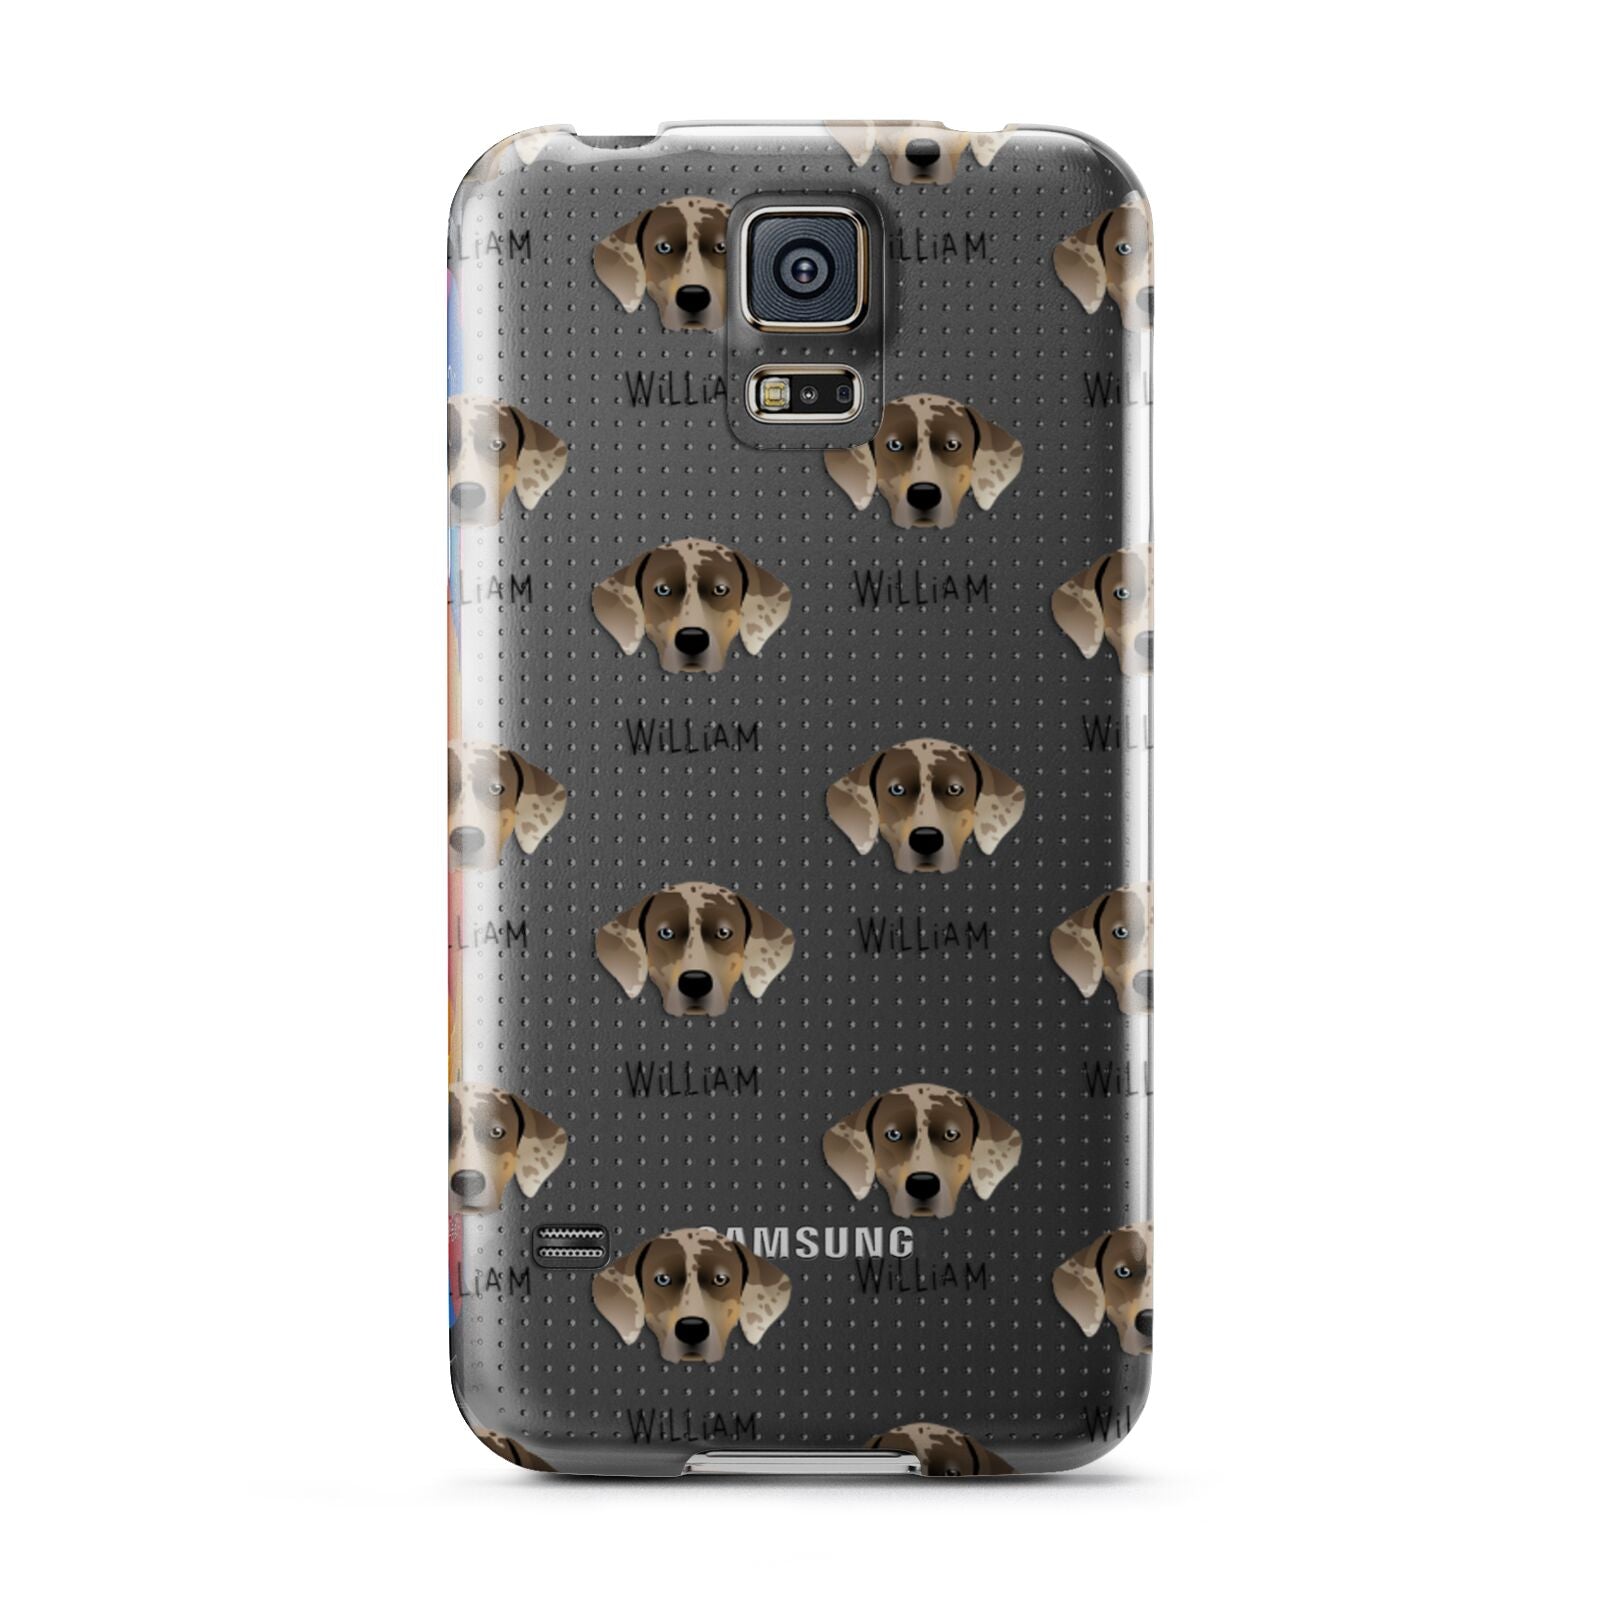 Catahoula Leopard Dog Icon with Name Samsung Galaxy S5 Case